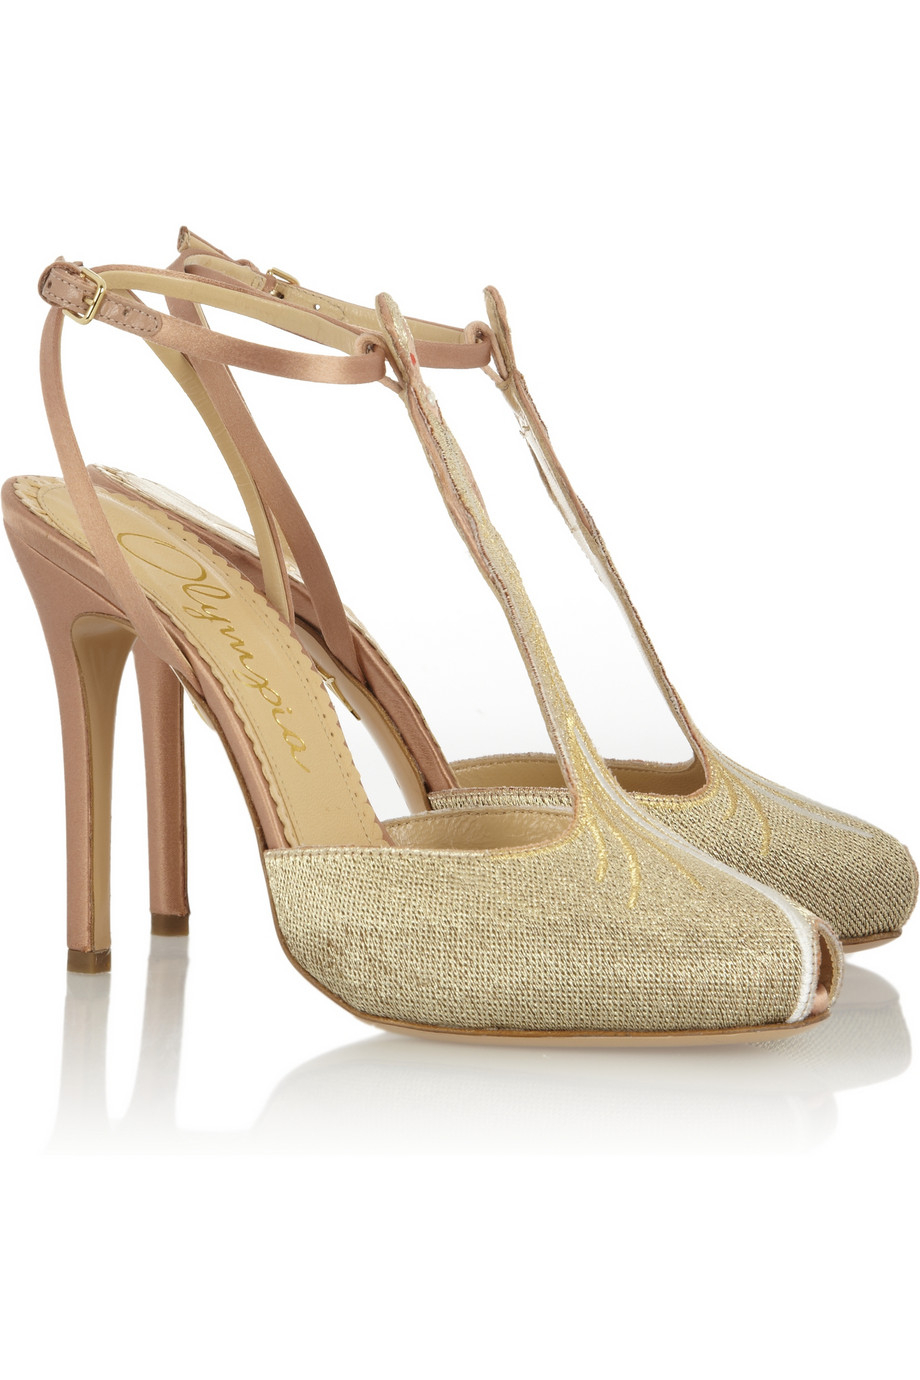 Lyst - Charlotte Olympia Mae West Woven And Satin Sandals in Metallic